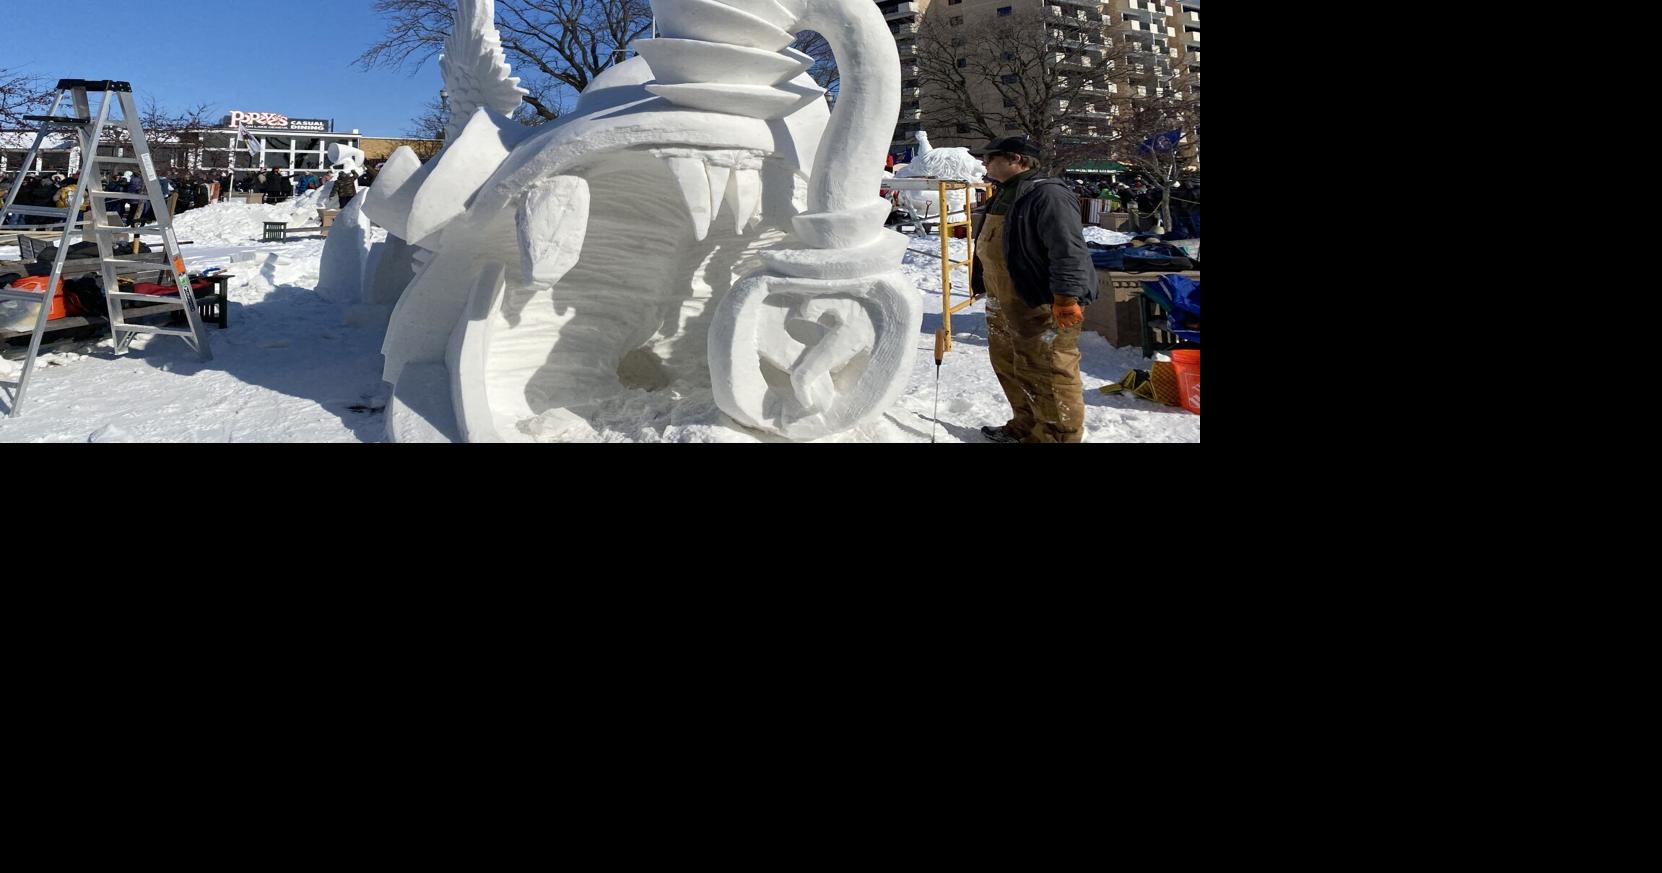 15 photos from the 2023 U.S. National Snow Sculpting Championship held